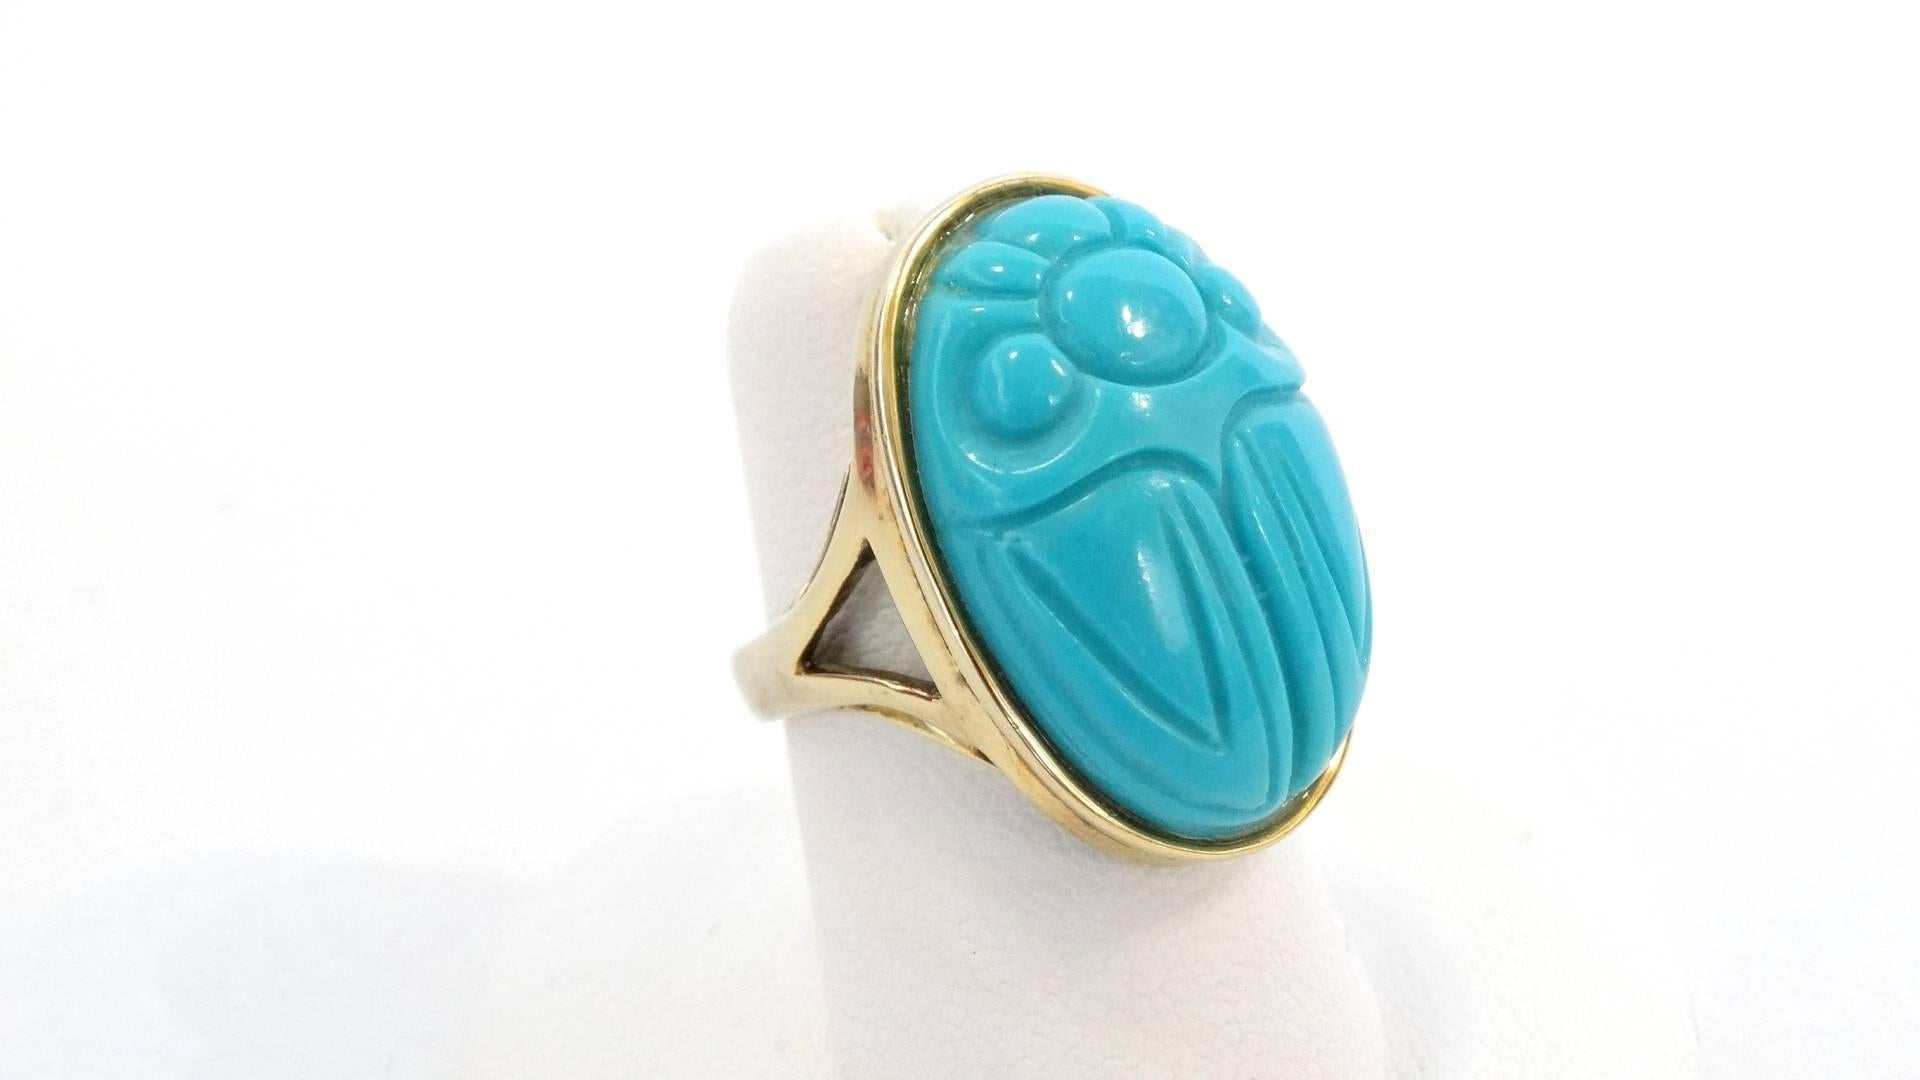  20th century vintage gold and turquoise beetle ring! Made of solid sterling silver and plated in gold. Glass turquoise carved scarab beetle charm at the center. Pairs perfectly with a handful of dainty gold rings. 

Gold plated on sterling silver